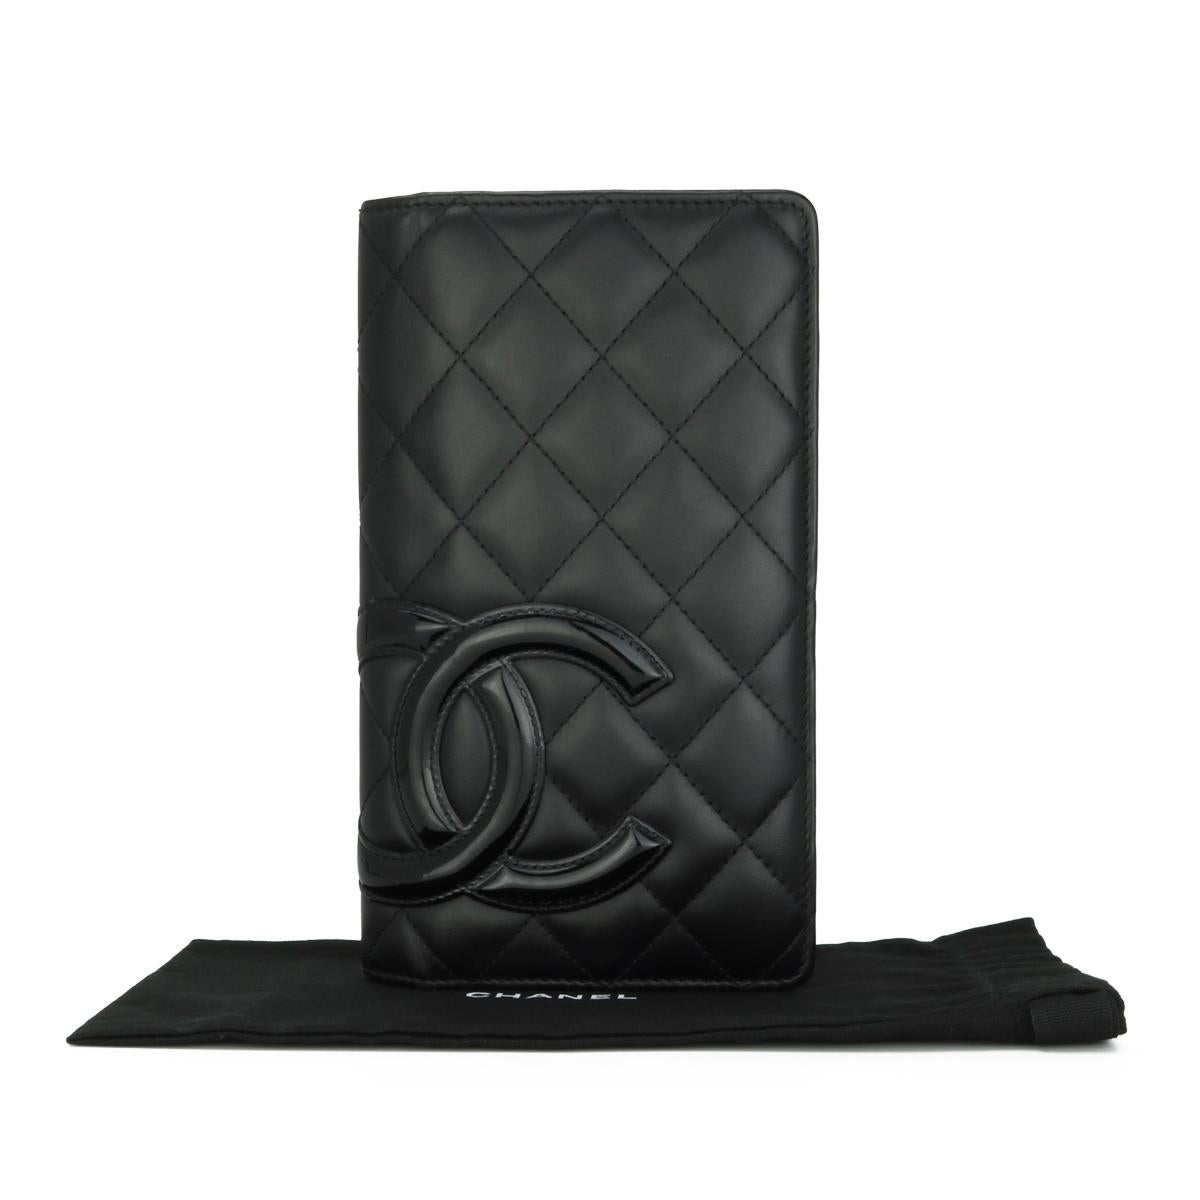 Chanel Quilted Cambon Long Flap Wallet Black Calfskin with Silver Hardware 2014.

This stunning Cambon wallet is in good condition, the wallet still holds its original shape, and the hardware is still very shiny.

- Exterior Condition: Good